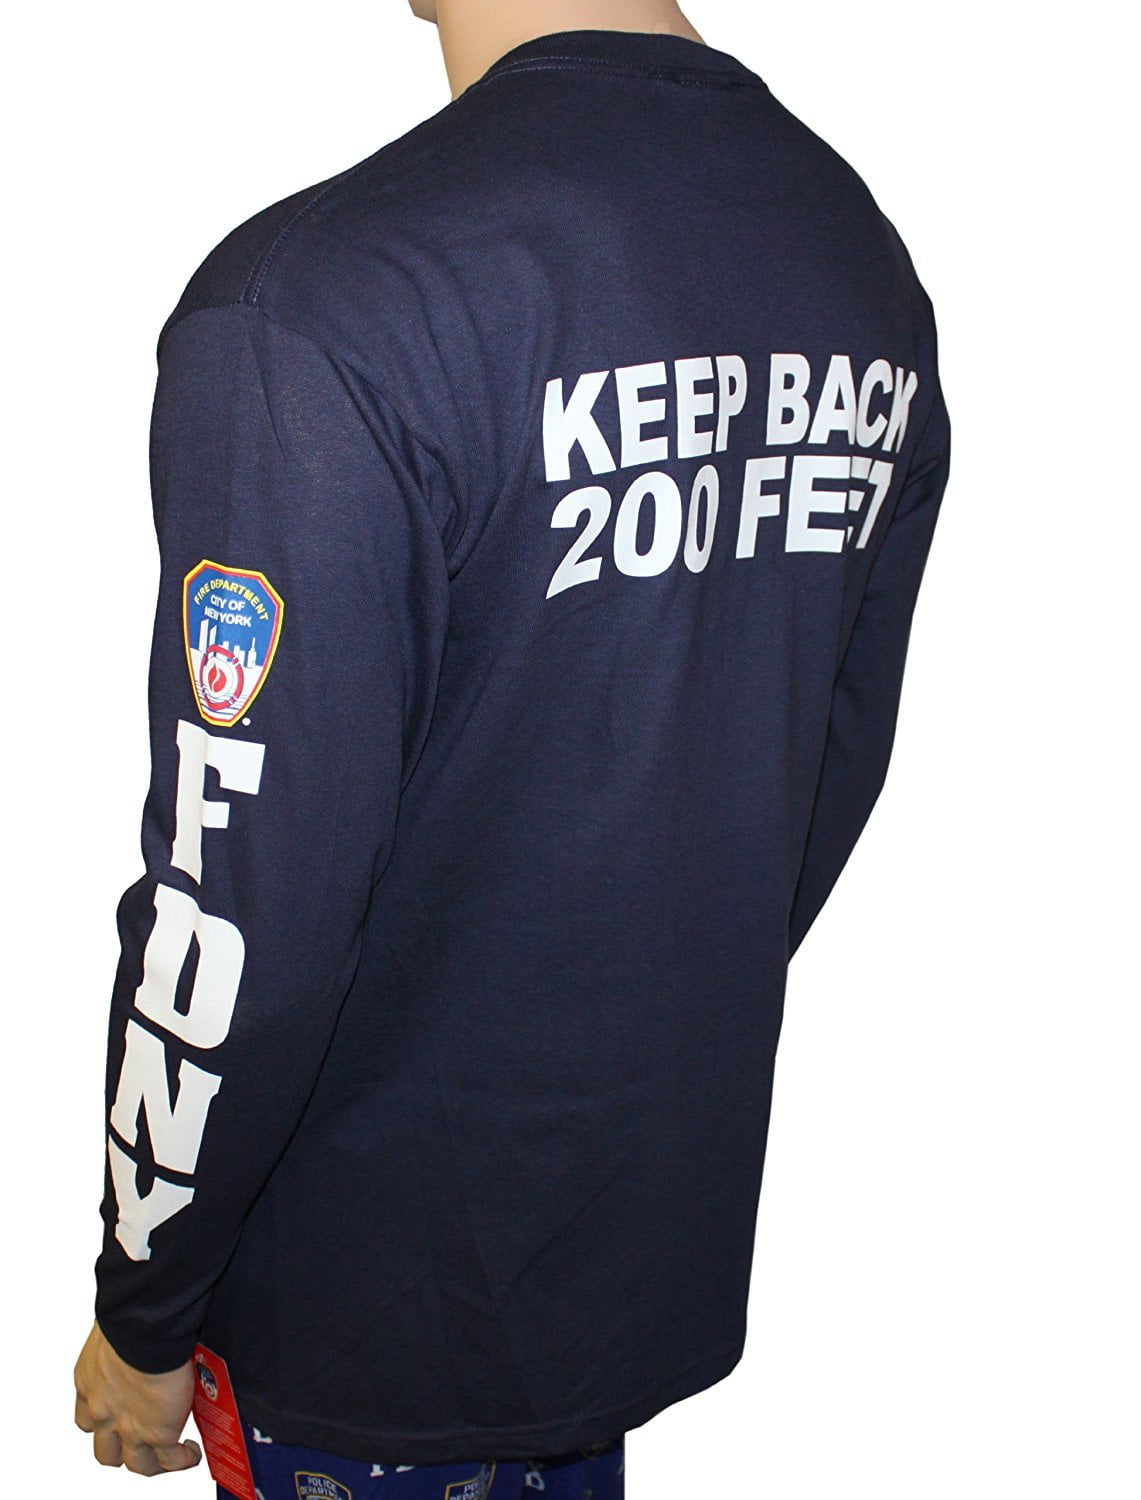 NYC FACTORY FDNY Long Sleeve Officially Licensed Keep Back 200 Feet T-Shirt navy